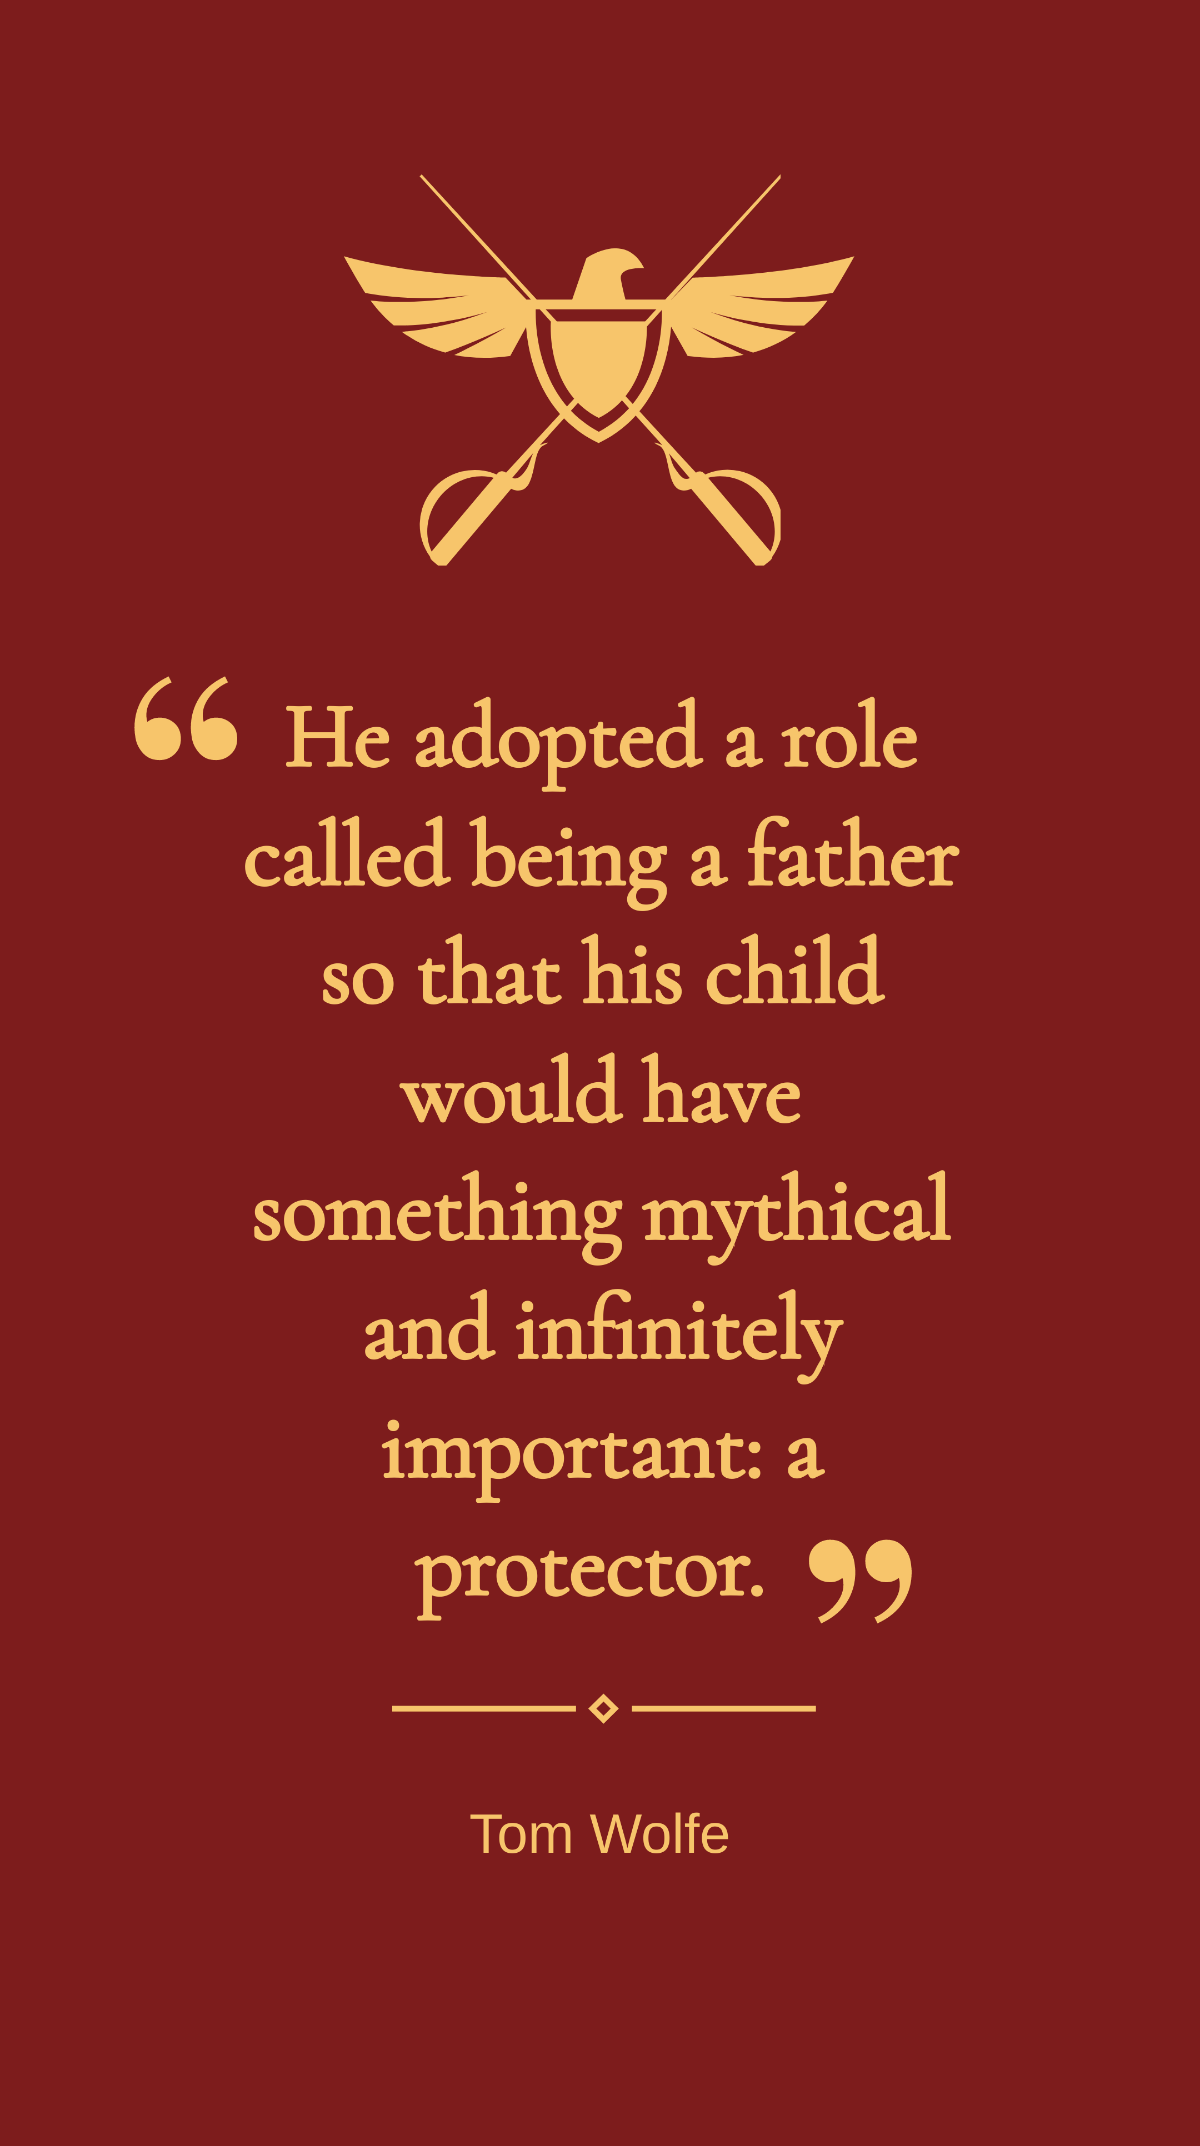 Tom Wolfe - He adopted a role called being a father so that his child would have something mythical and infinitely important: a protector. Template